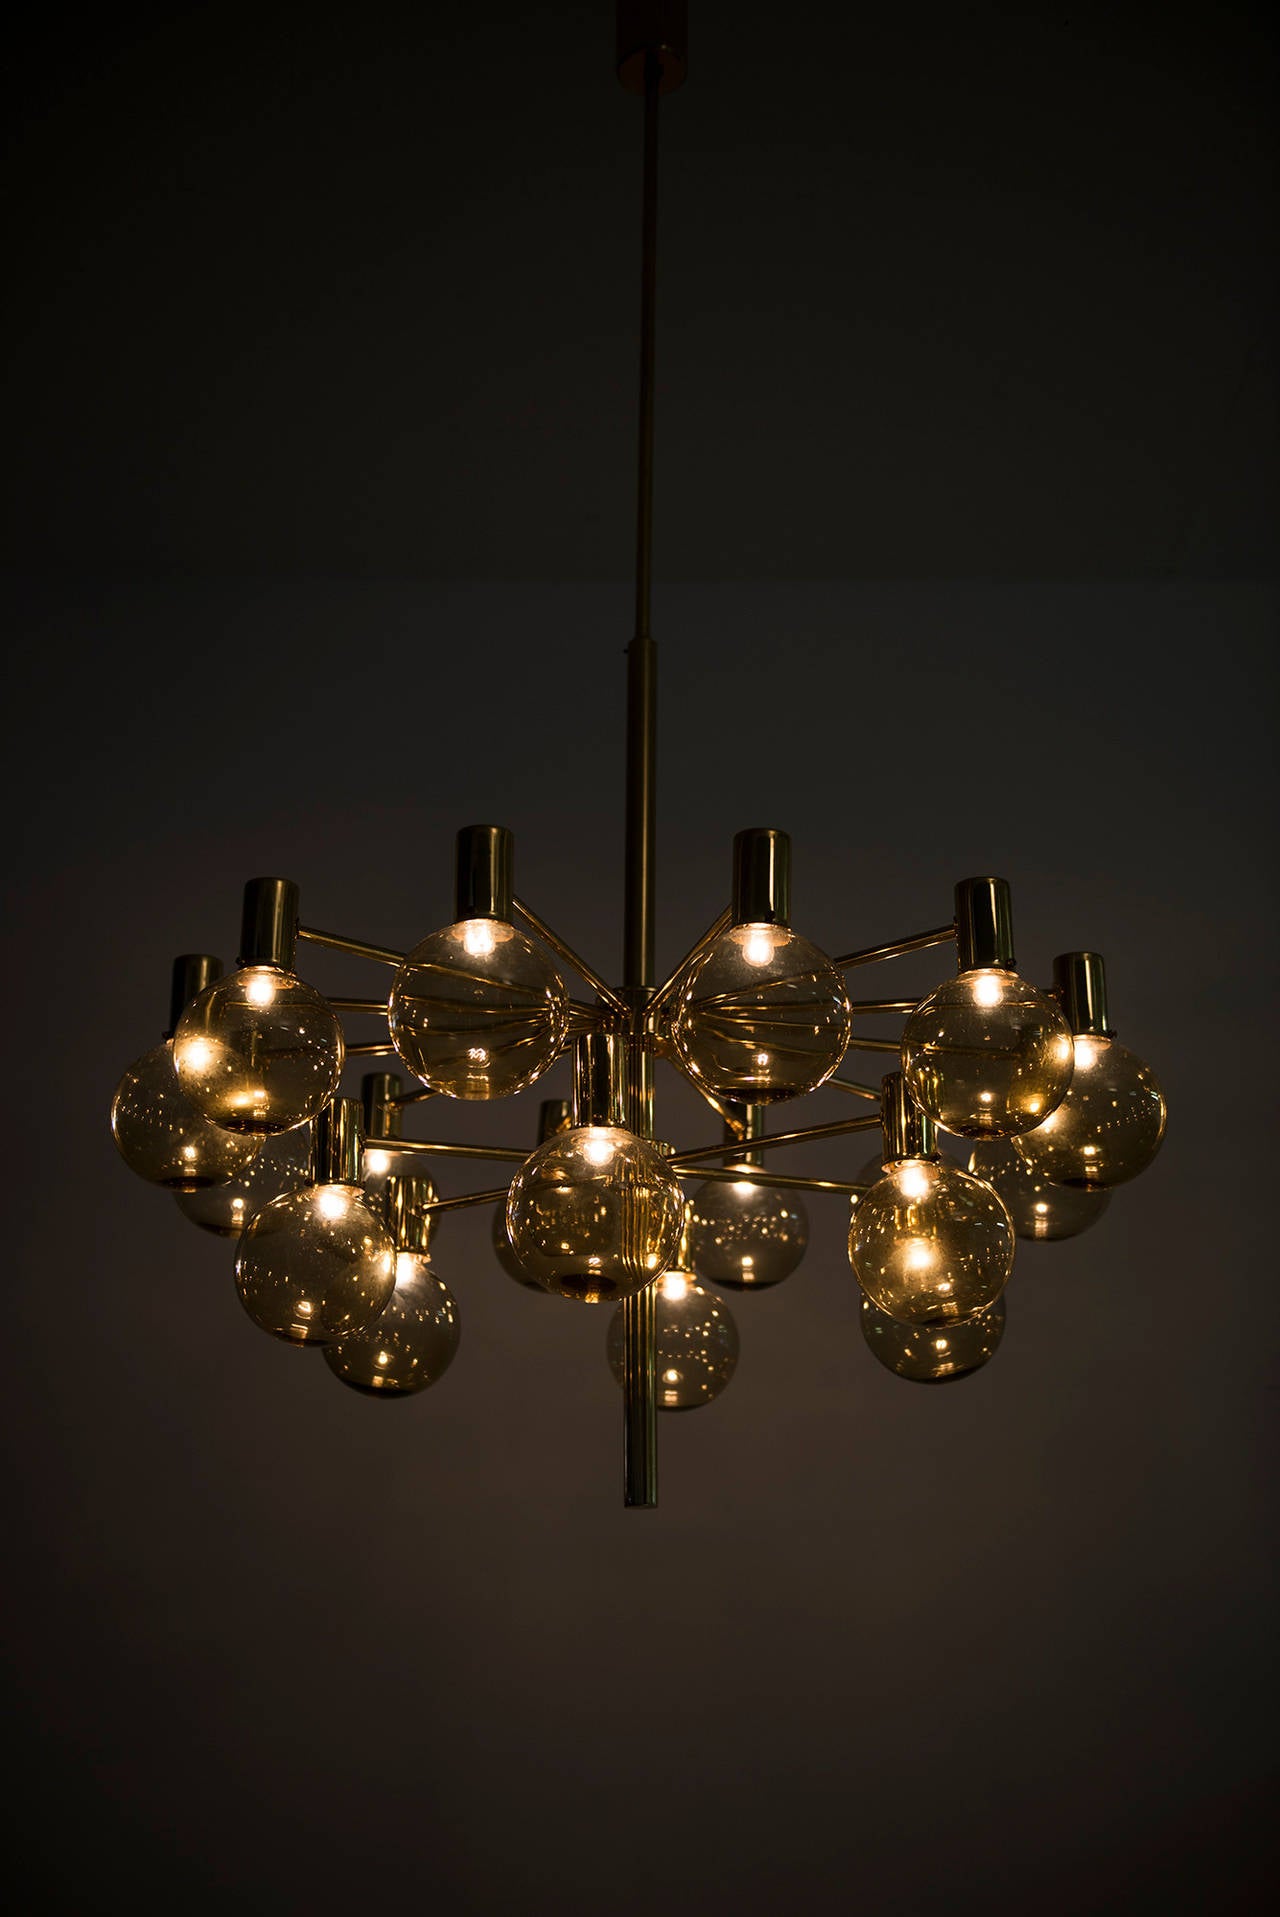 Mid-Century Modern Hans-Agne Jakobsson Ceiling Lamps in Brass and Glass